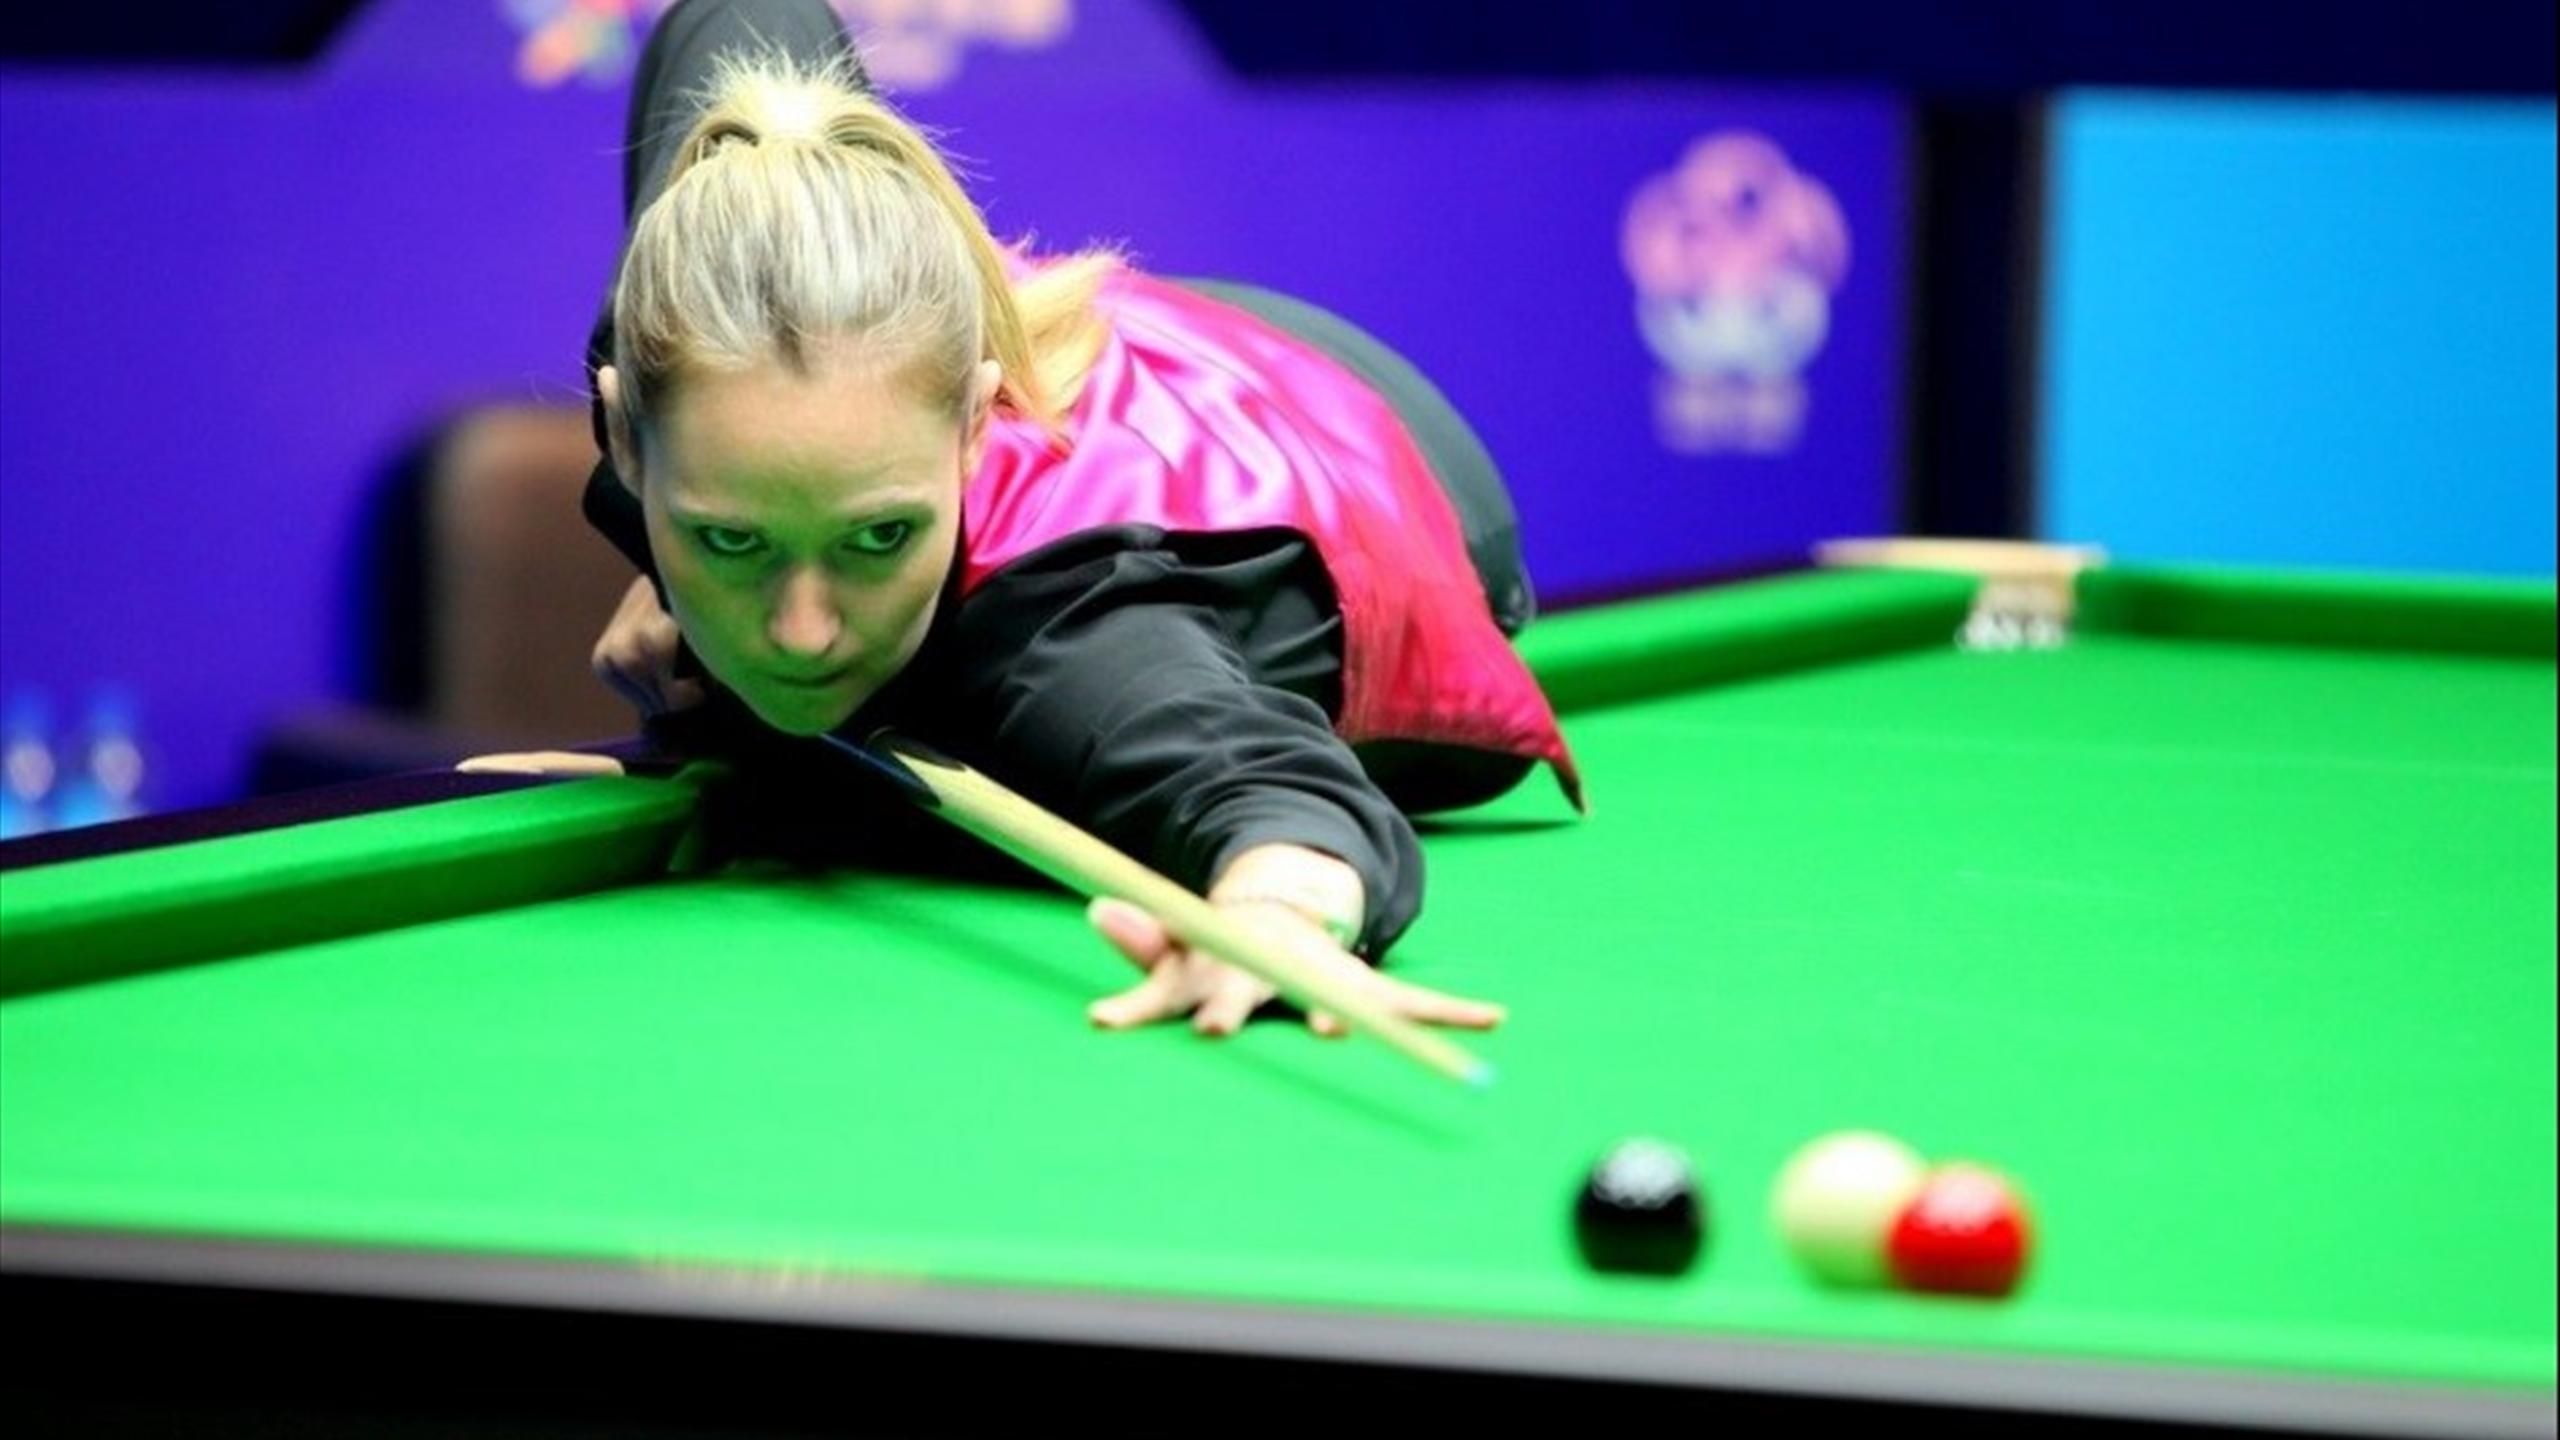 Snooker Shoot Out 2021 LIVE - John Higgins, Reanne Evans and Martin Gould all in action